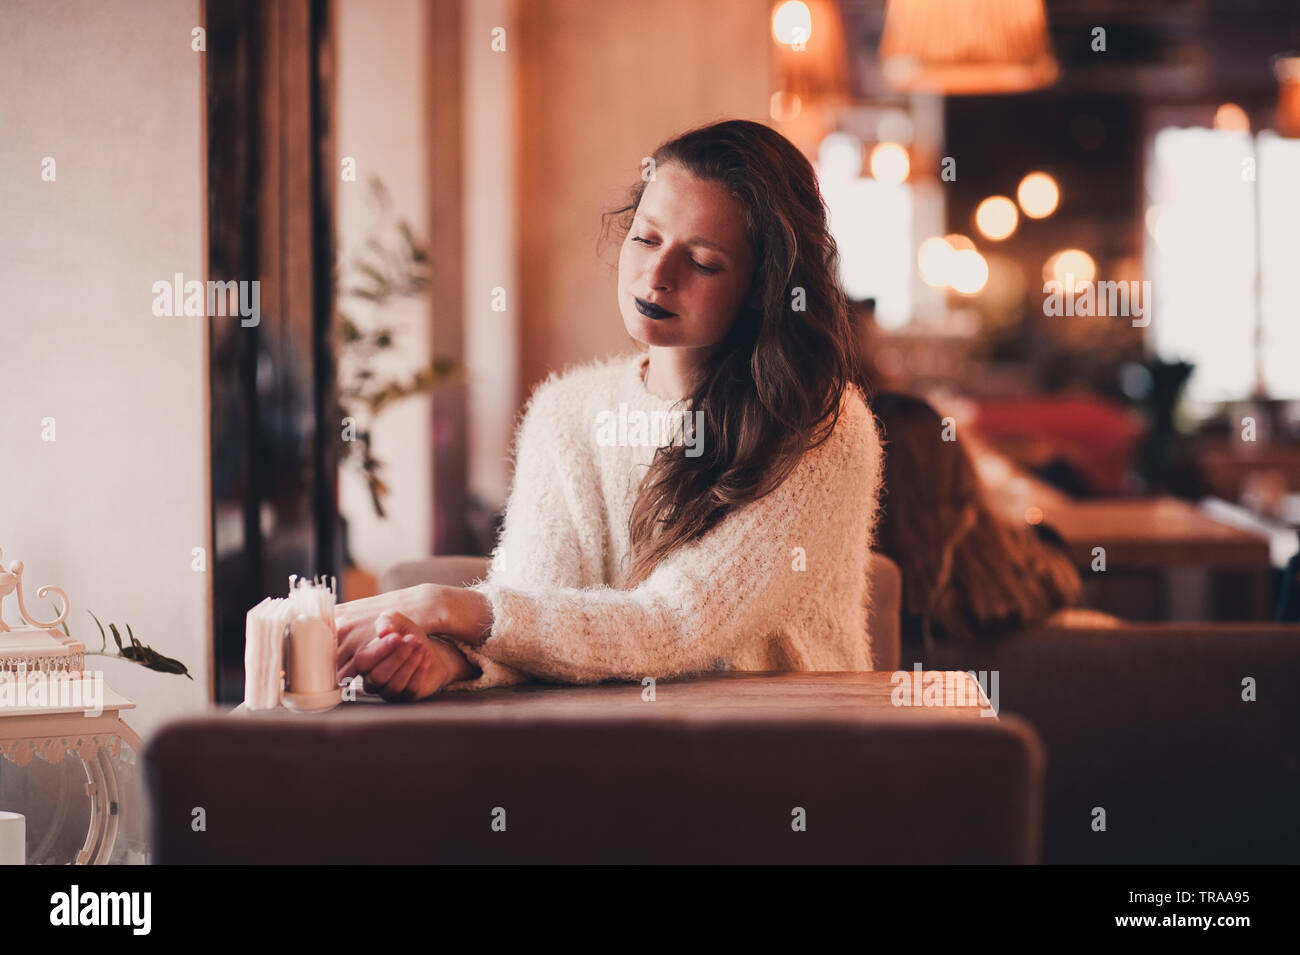 Stylish girl 24-29 year old sitting in restaurant wearing fluffy white sweater. 20s. Stock Photo